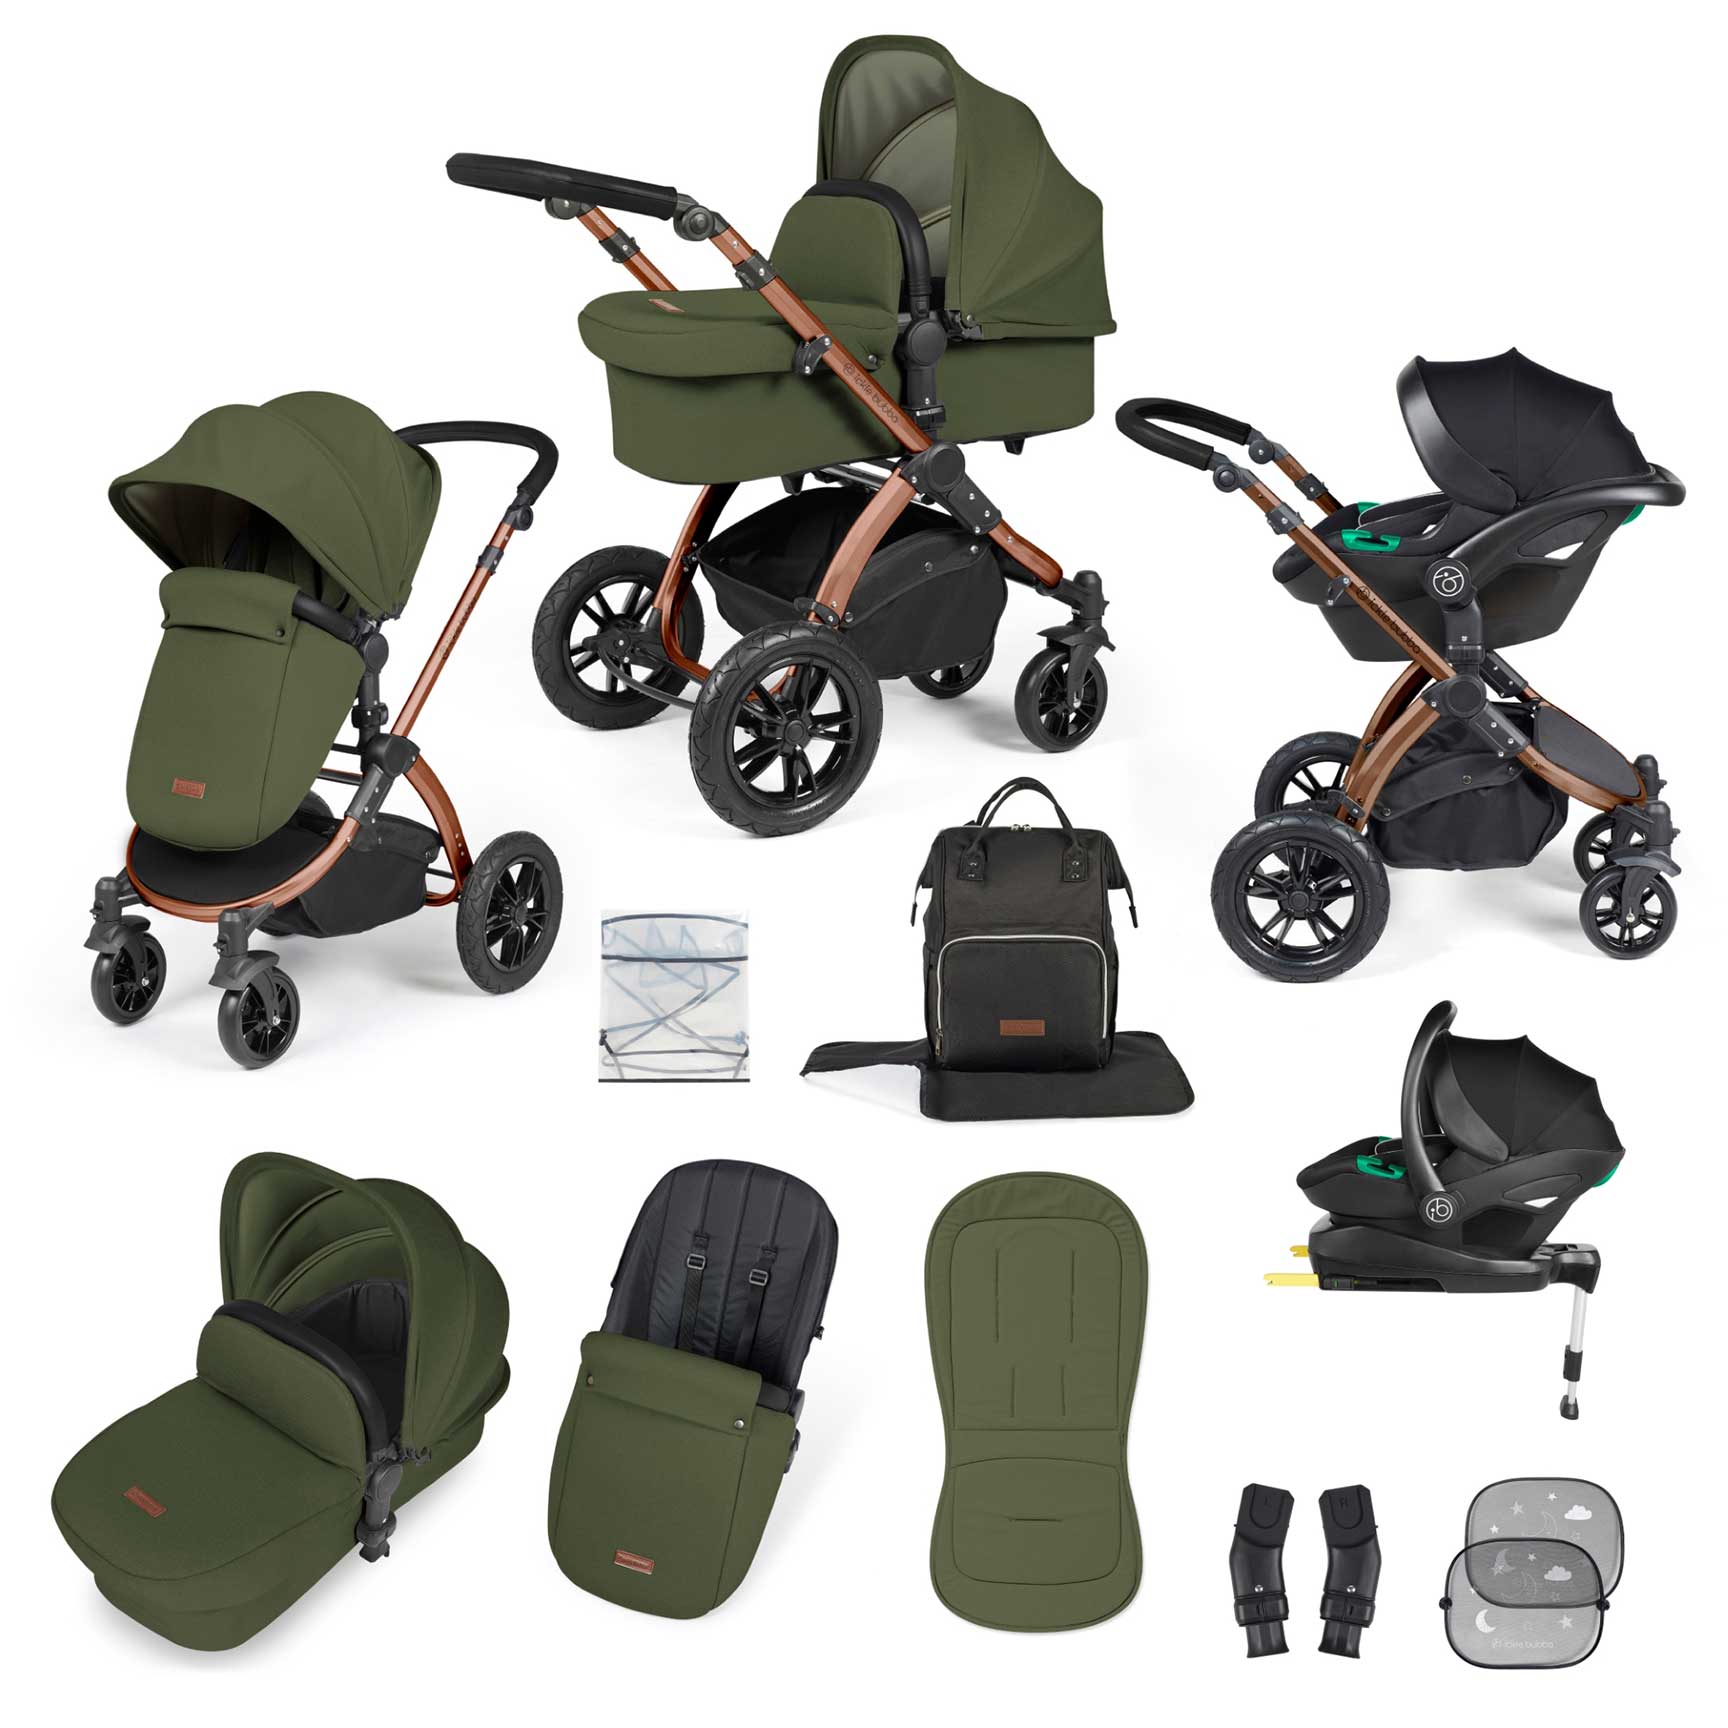 Ickle Bubba Stomp Luxe All-in-One Travel System with Isofix Base in Bronze/Woodland/Black Travel Systems 10-011-300-140 5056515026634